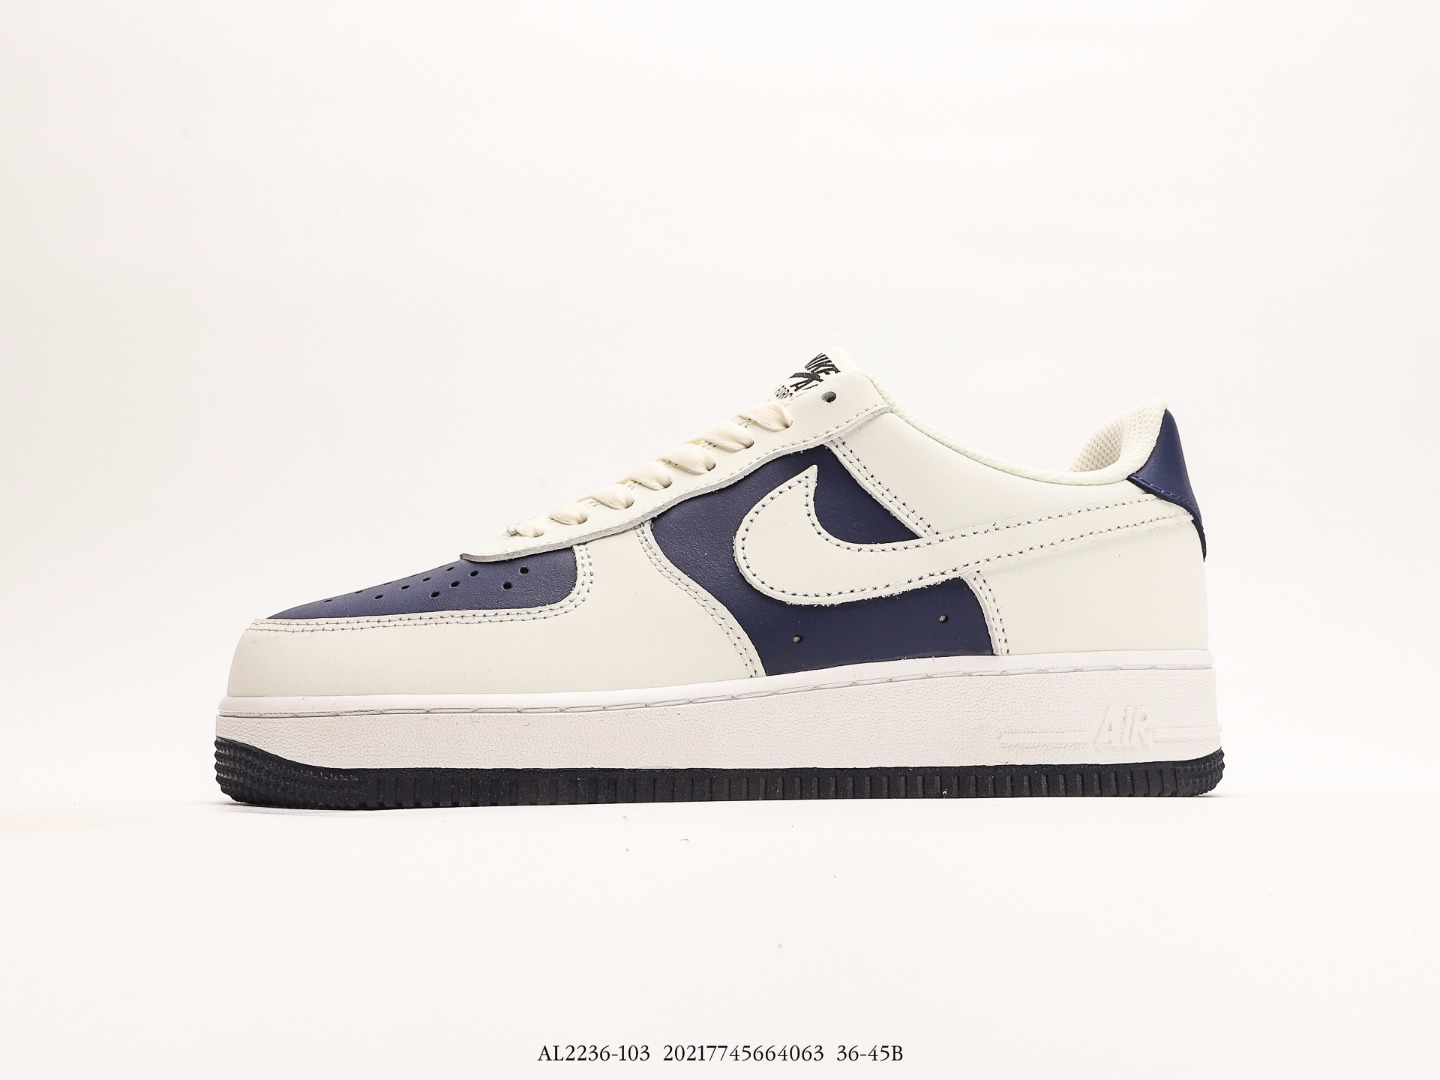 Nike By You Air Force 1'07 Low Retro SP_AL2236-103